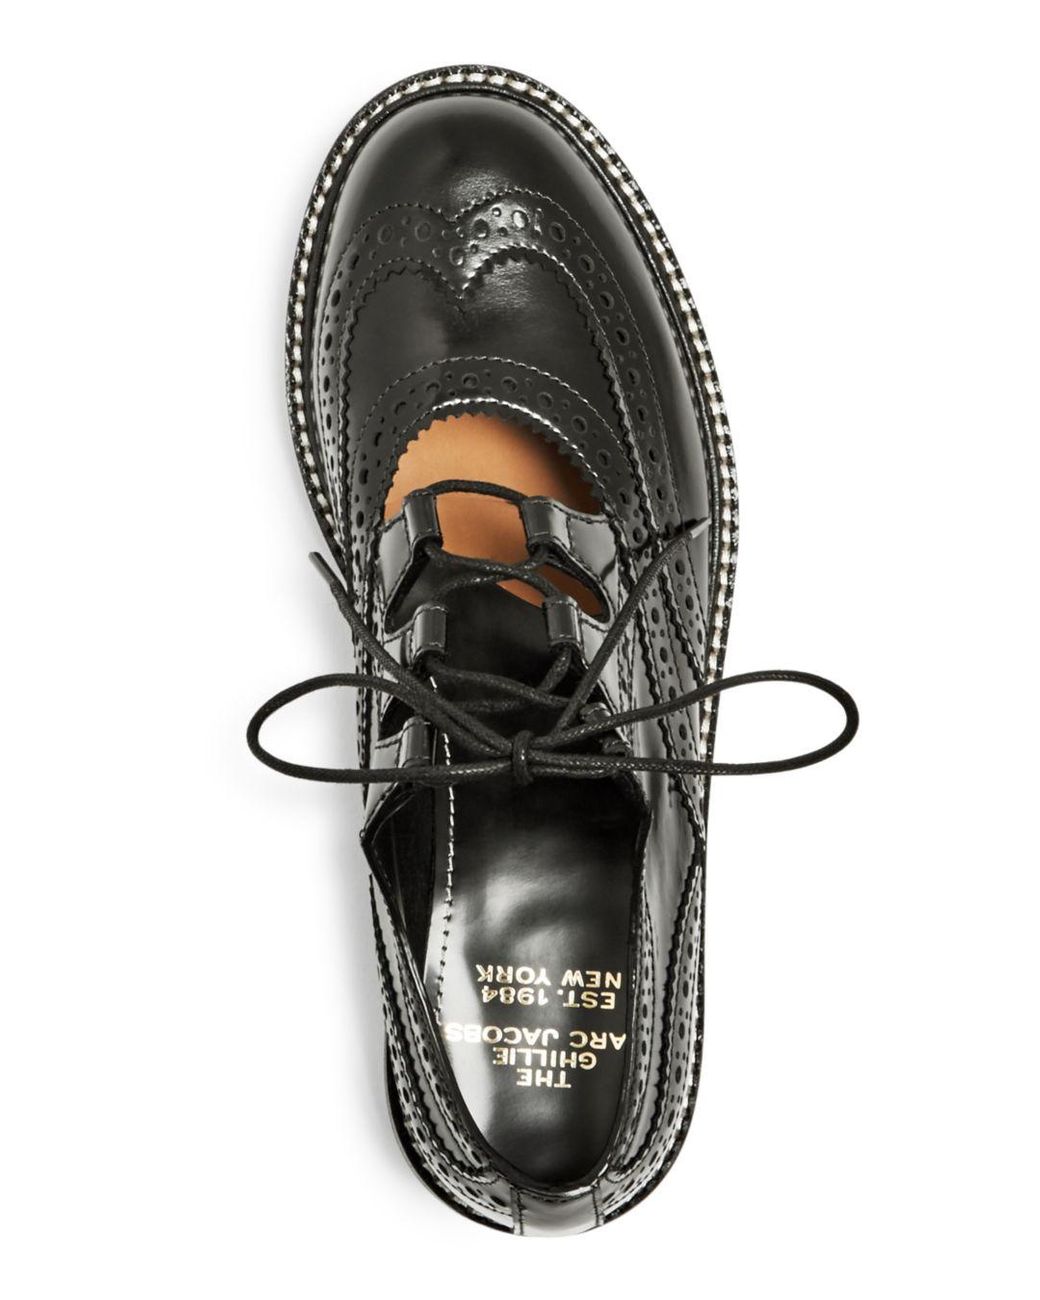 CC Brand New Laces Shoes Gillie Brogues Black & Leather Tassels 